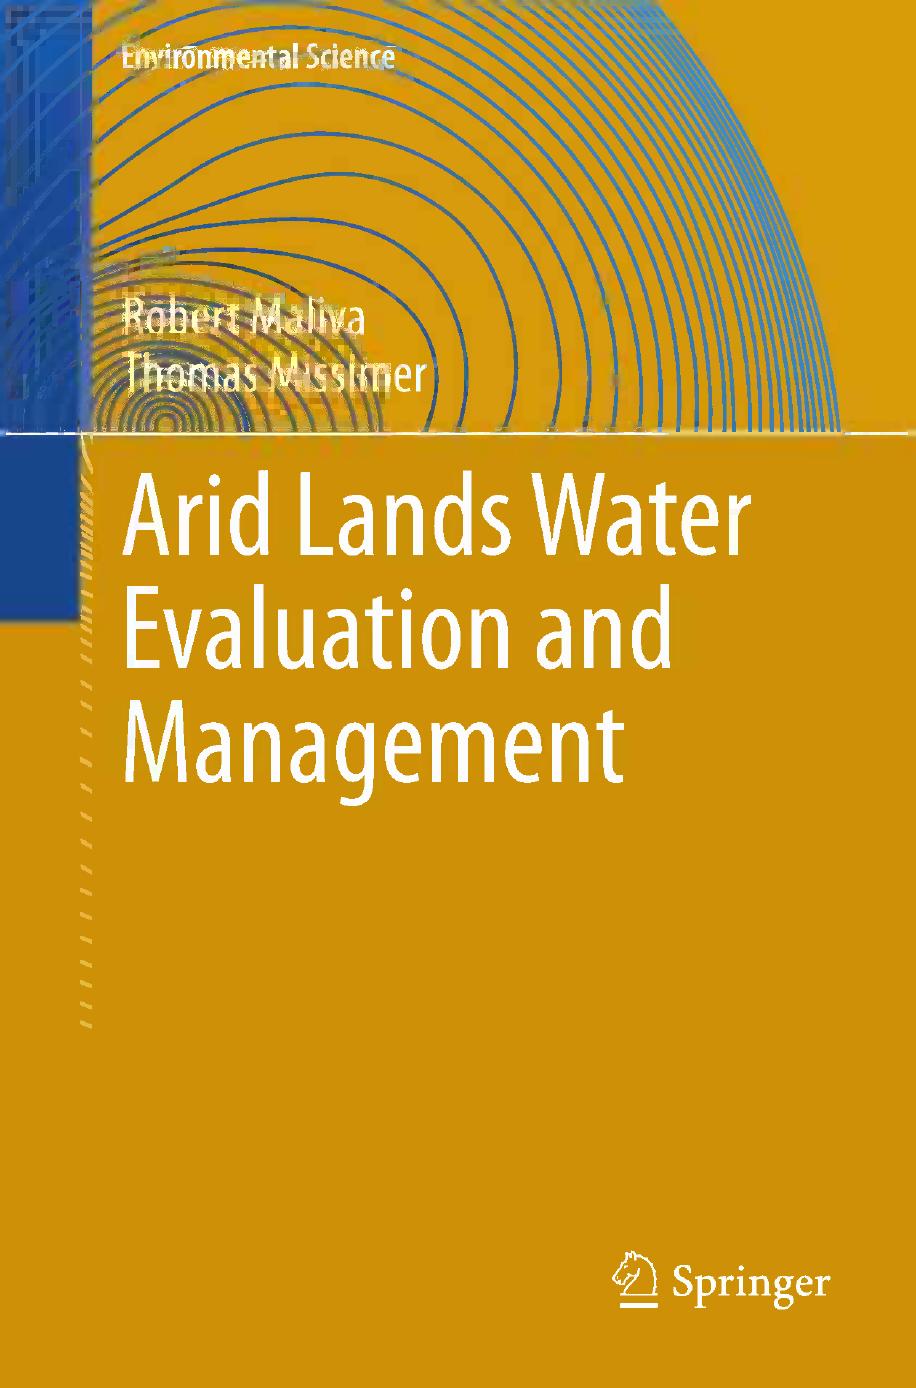 Arid Lands Water Evaluation and Management by Robert Maliva, 2012